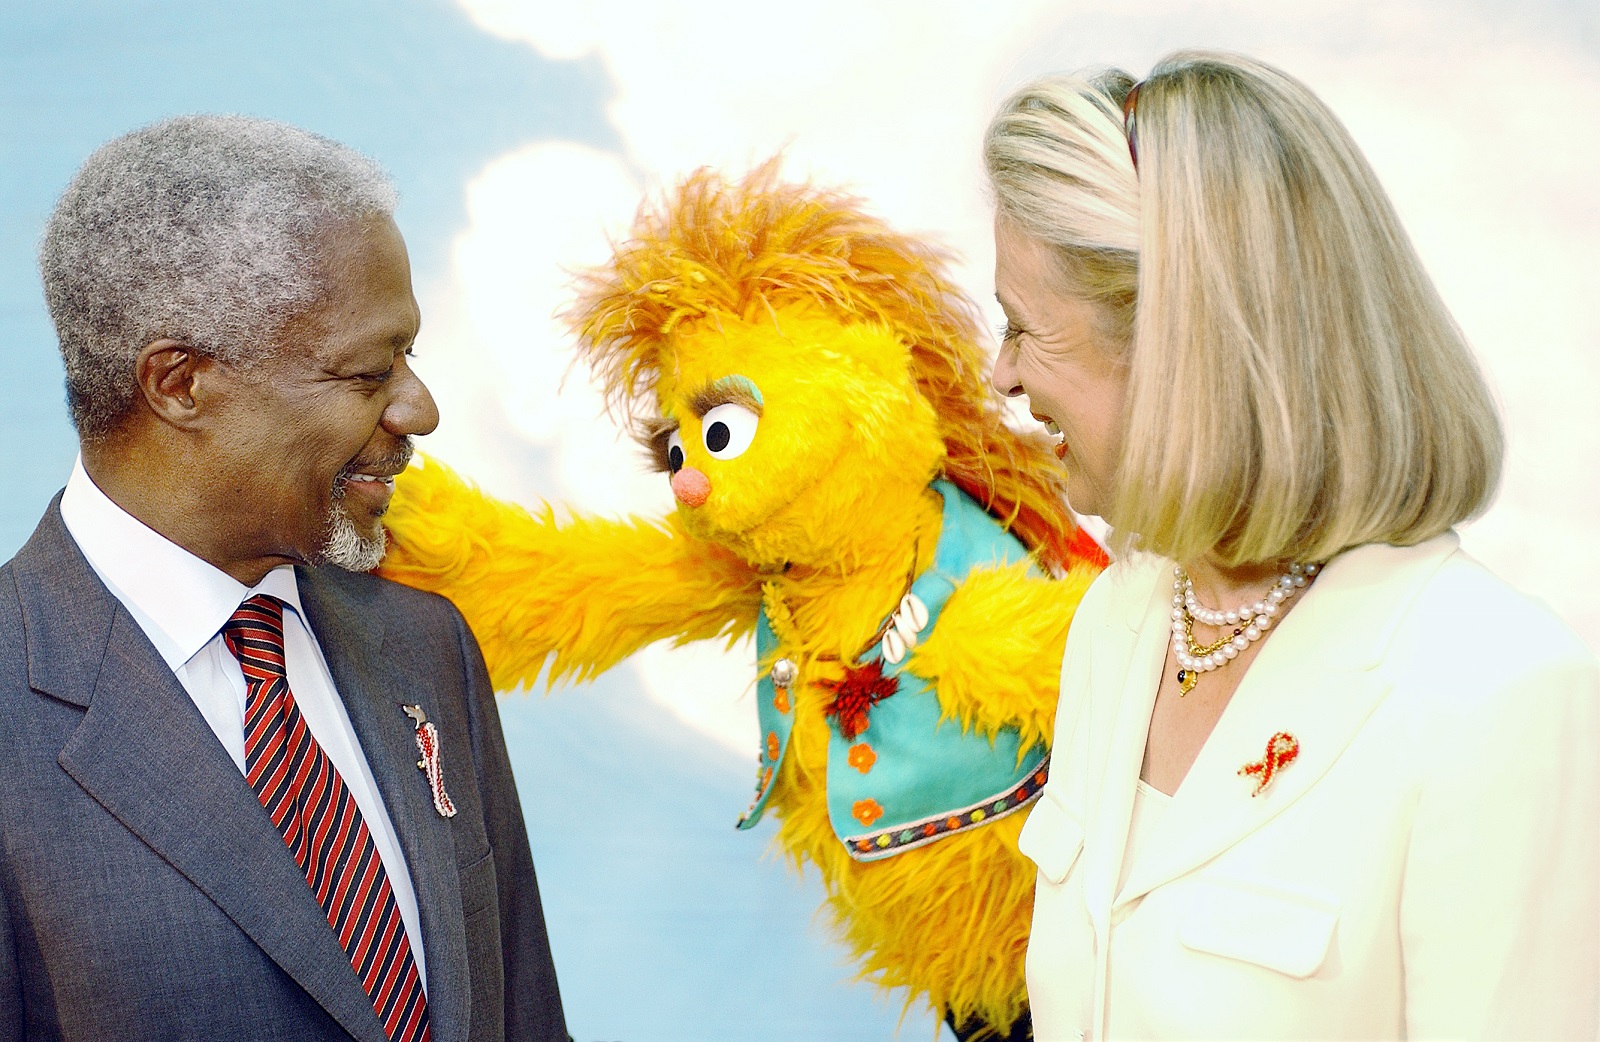 Former UN Secretary-General Kofi Annan (left) and his wife, Mrs. Nane Annan (right) pose with Kami, a HIV positive muppet on the South African version of Sesame Street whose name means acceptance in the Tswana language. Credit: UN Photo/Evan Schneider